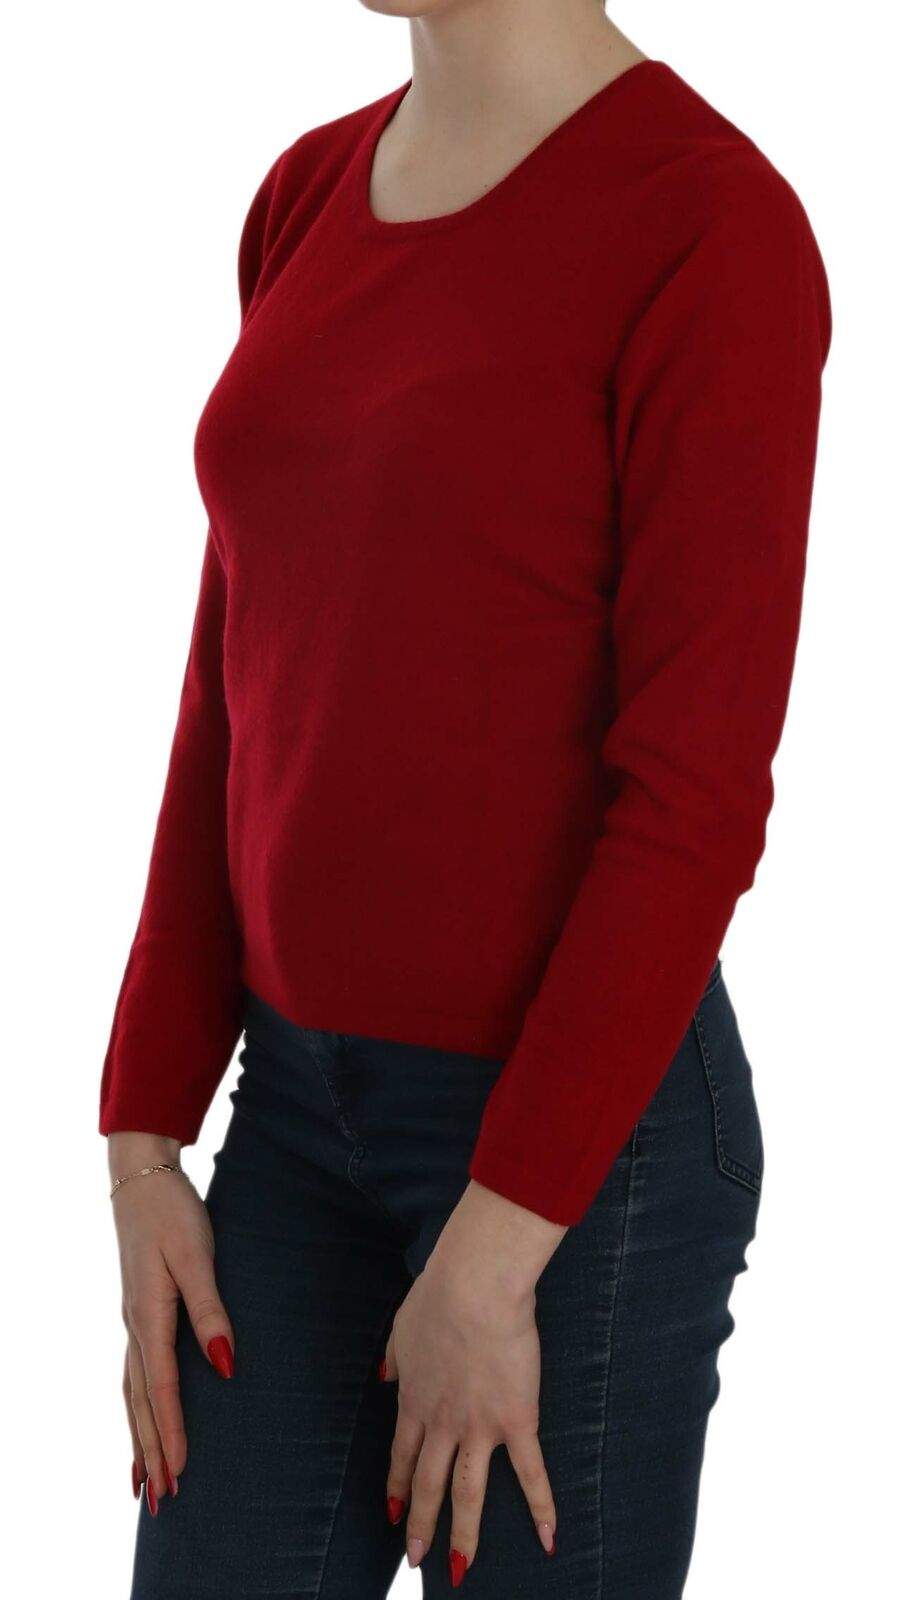 MILA SCHÖN Red Round Neck Pullover Cashmere Sweater feed-agegroup-adult, feed-color-Red, feed-gender-female, L, M, MILA SCHÖN, Red, S, Sweaters - Women - Clothing, XS at SEYMAYKA